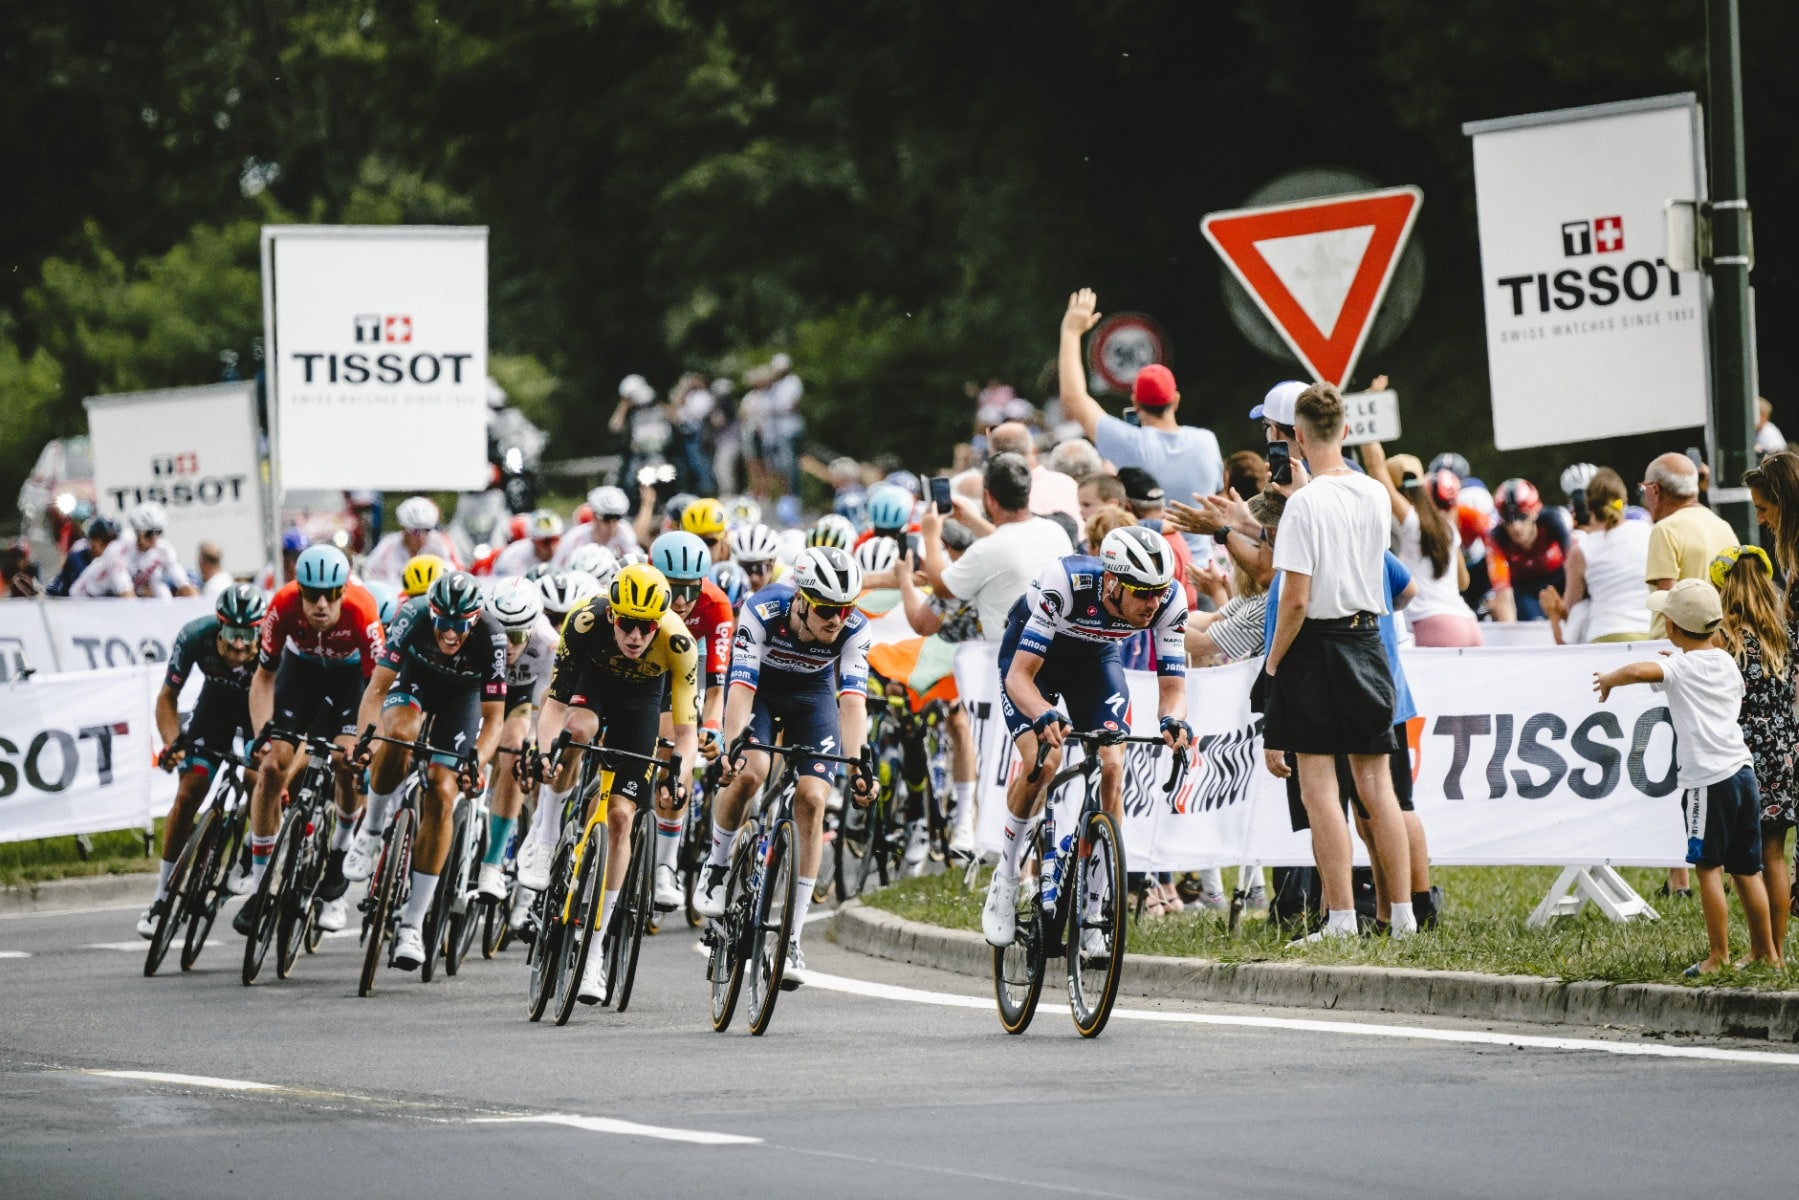 Tissot and the Tour de France: Celebrating A Legacy of Timekeeping & Innovation